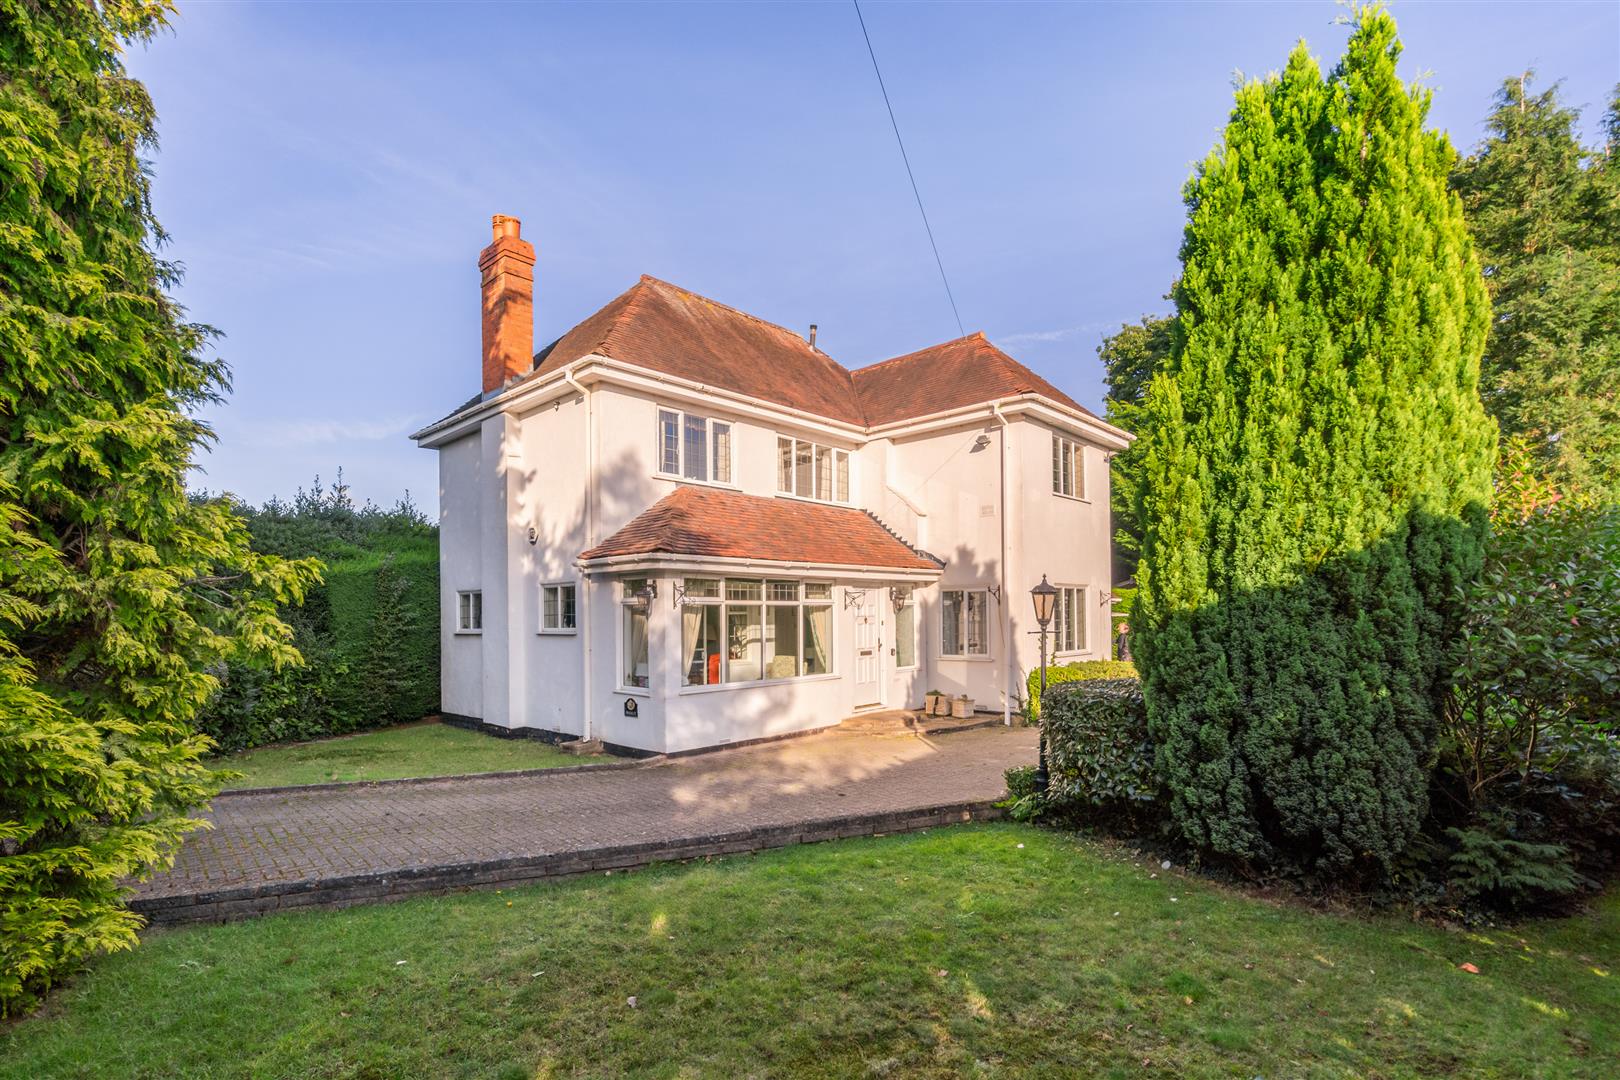 3 bed detached house for sale in Haslucks Green Road, Solihull  - Property Image 1